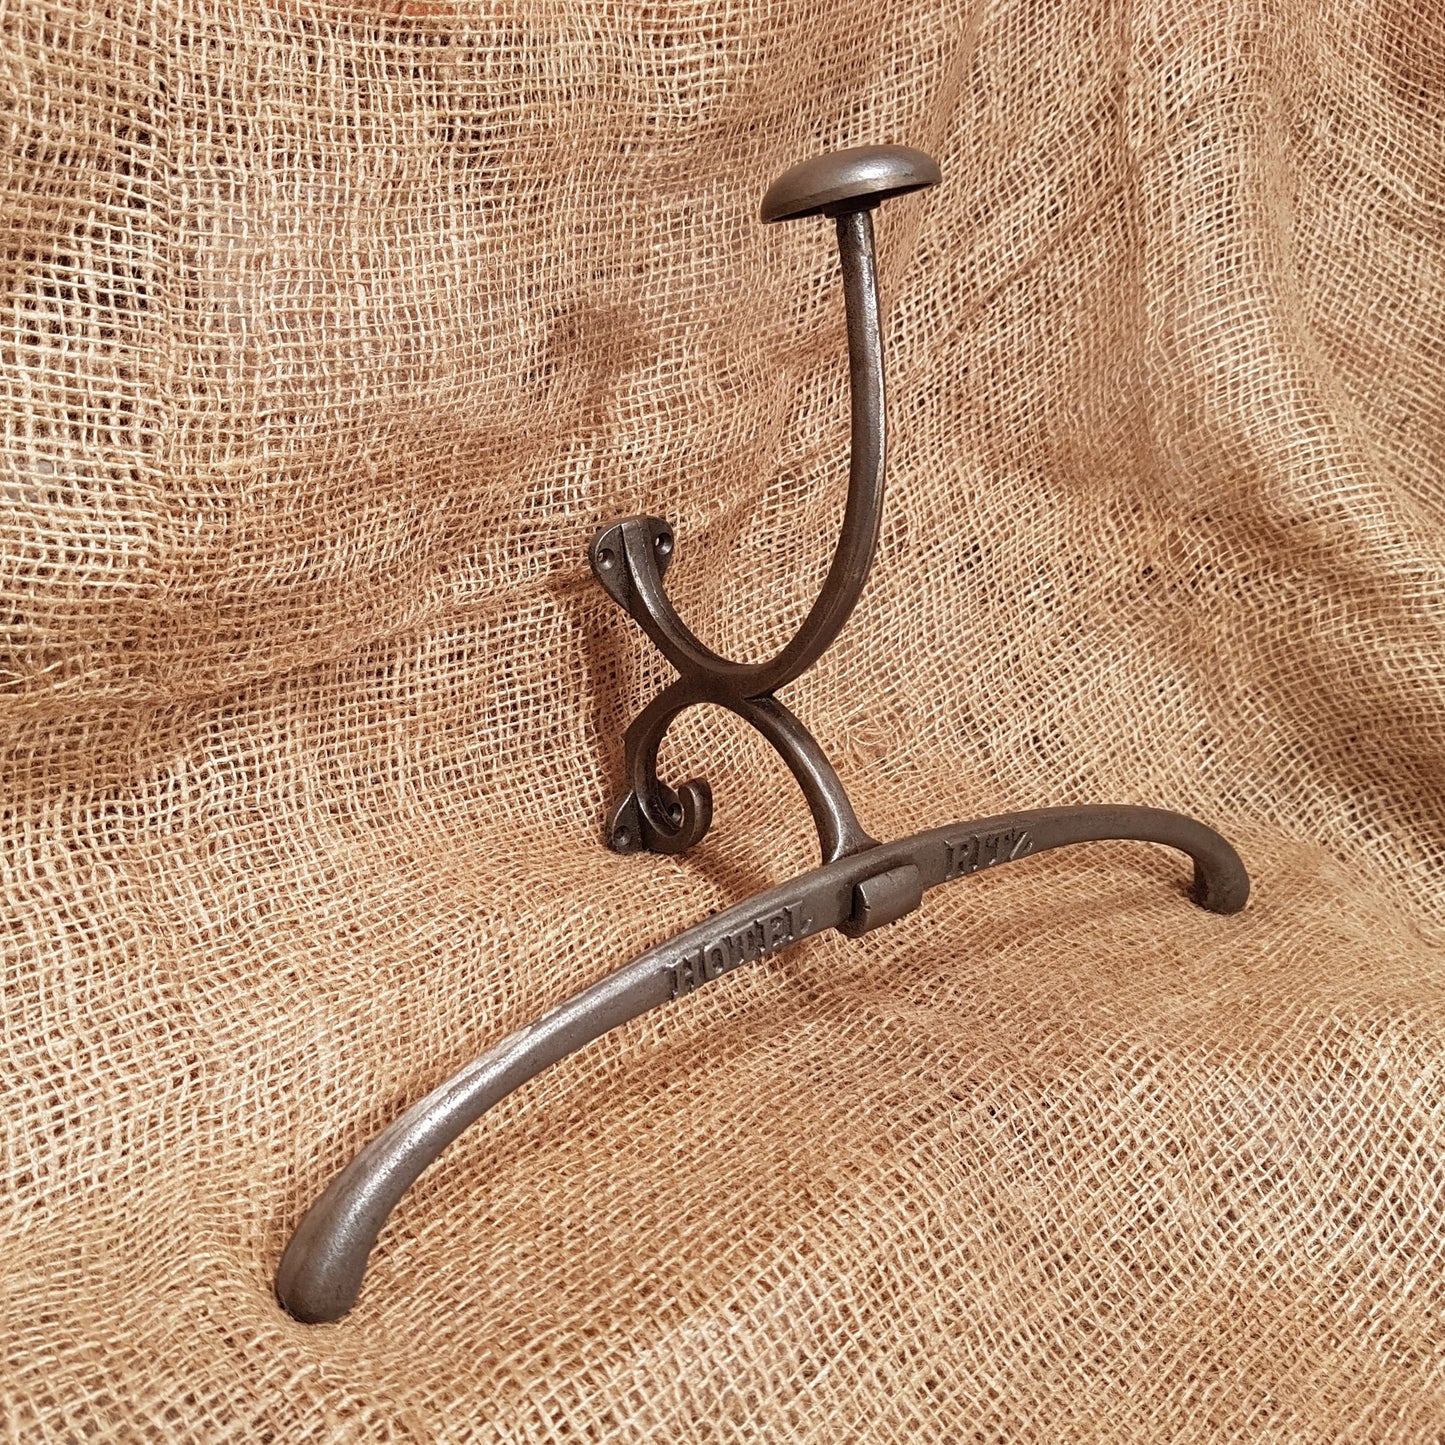 Jacket Hanger - Hotel Ritz - Spearhead Collection - Hat and Coat Hooks - Hangers, Hat and Coat Hooks, Home Decor, Hooks, Hotel, Interior Decor, Made in England, Victorian